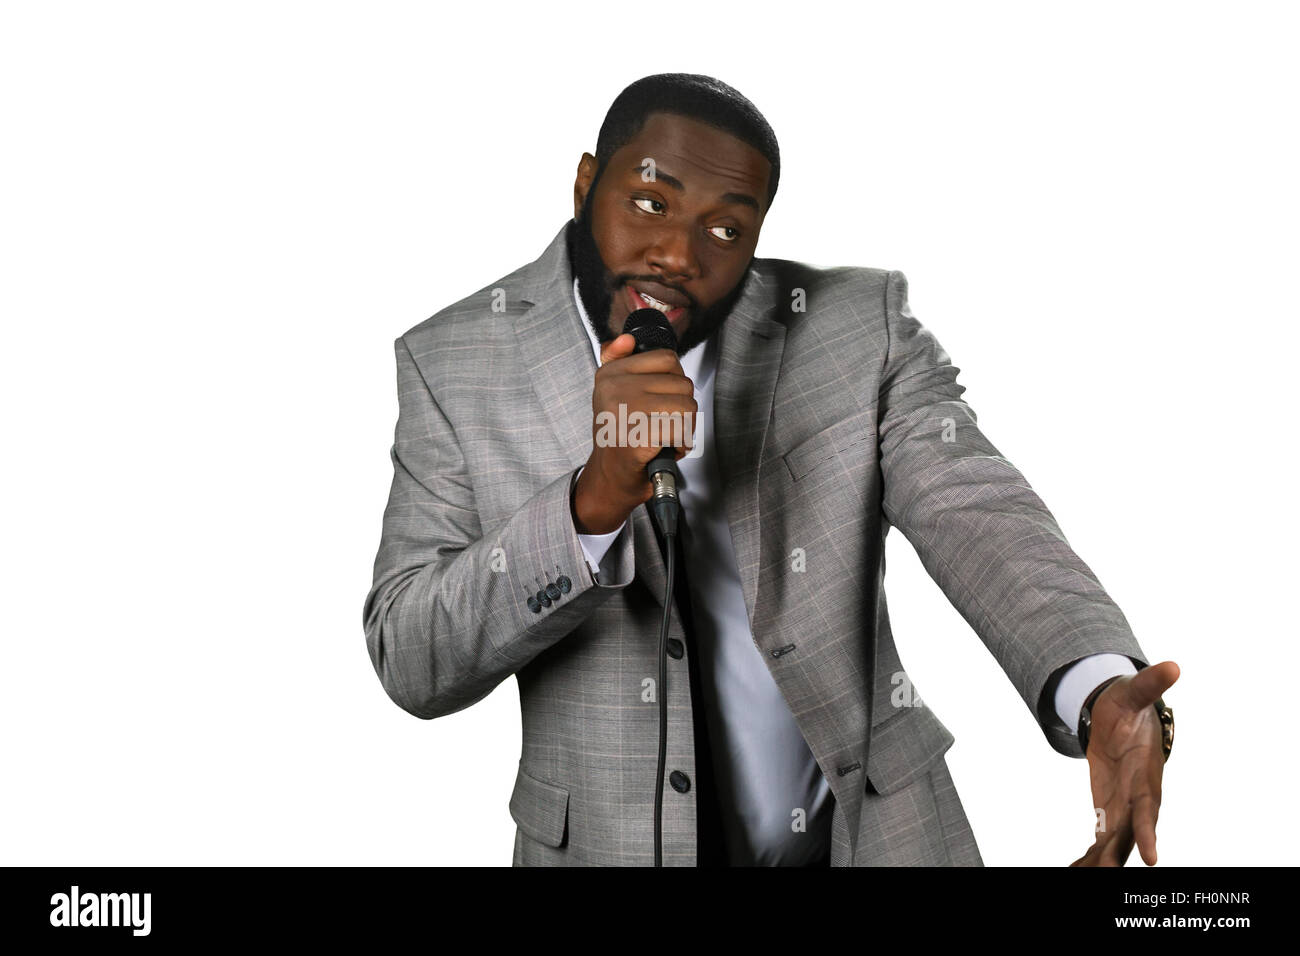 Black stand-up comedian. Stock Photo